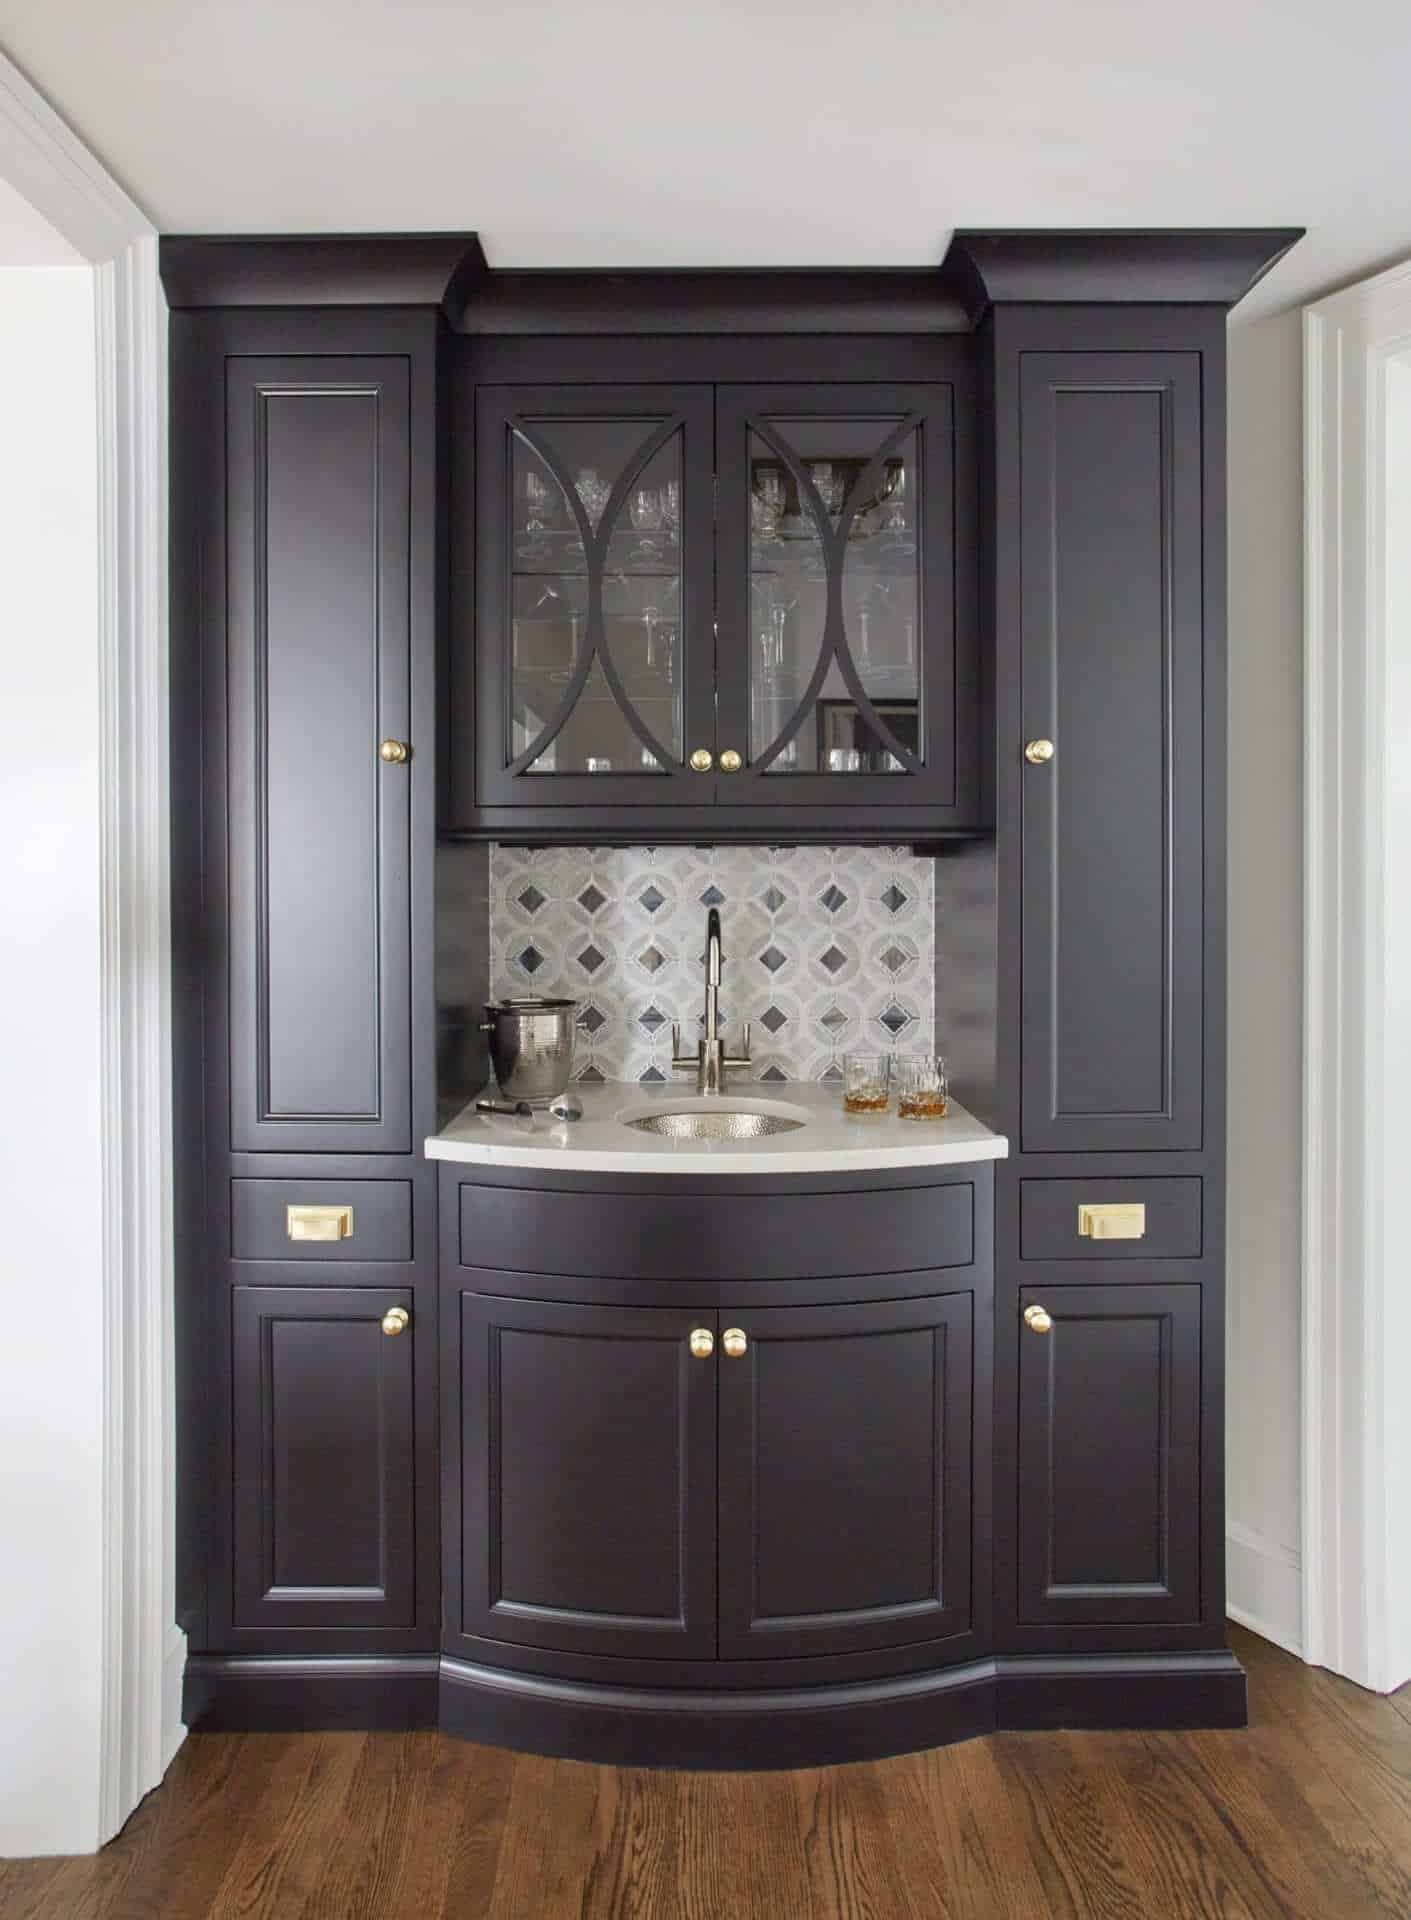 Butler's pantry features black Bilotta cabinetry with Statuario Maximus Caesarstone countertop, brass hardware and patterned tile backsplash.